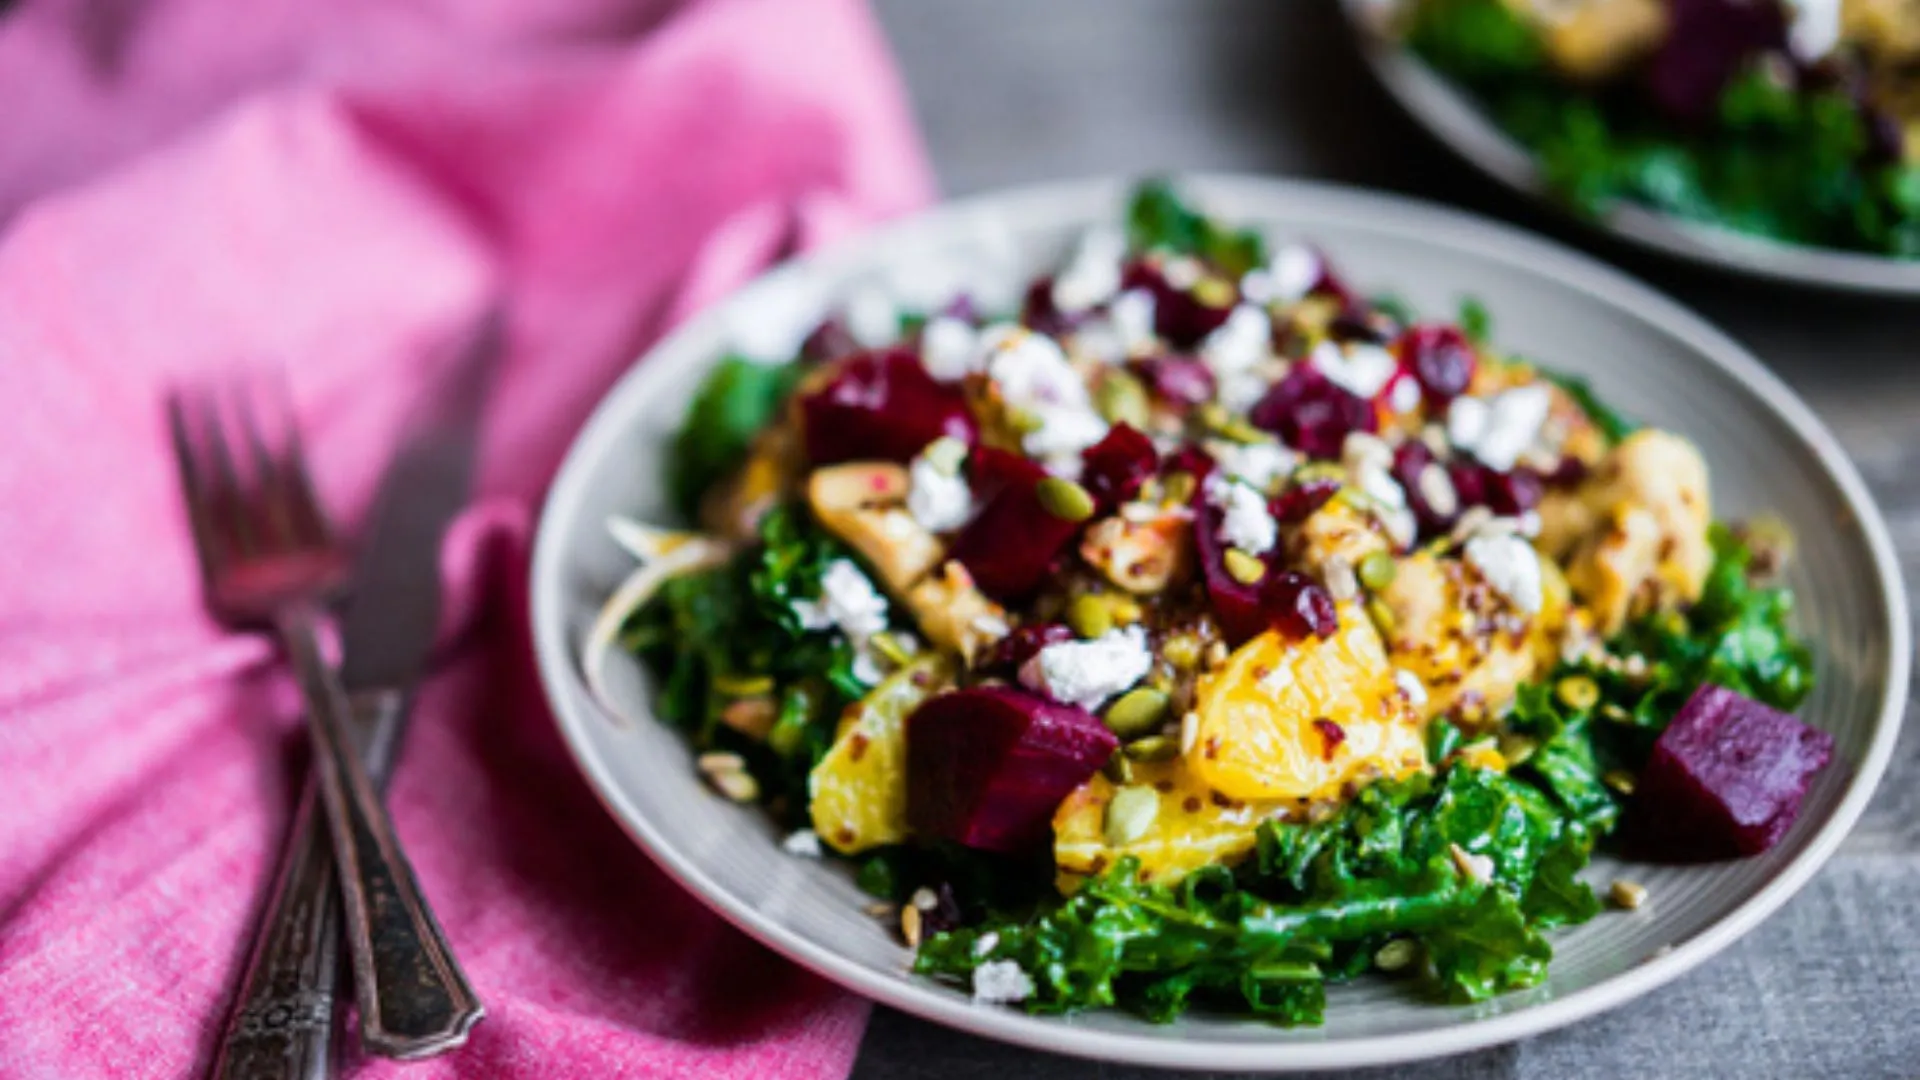 Roasted Beet Salad with Feta Cheese and Oranges